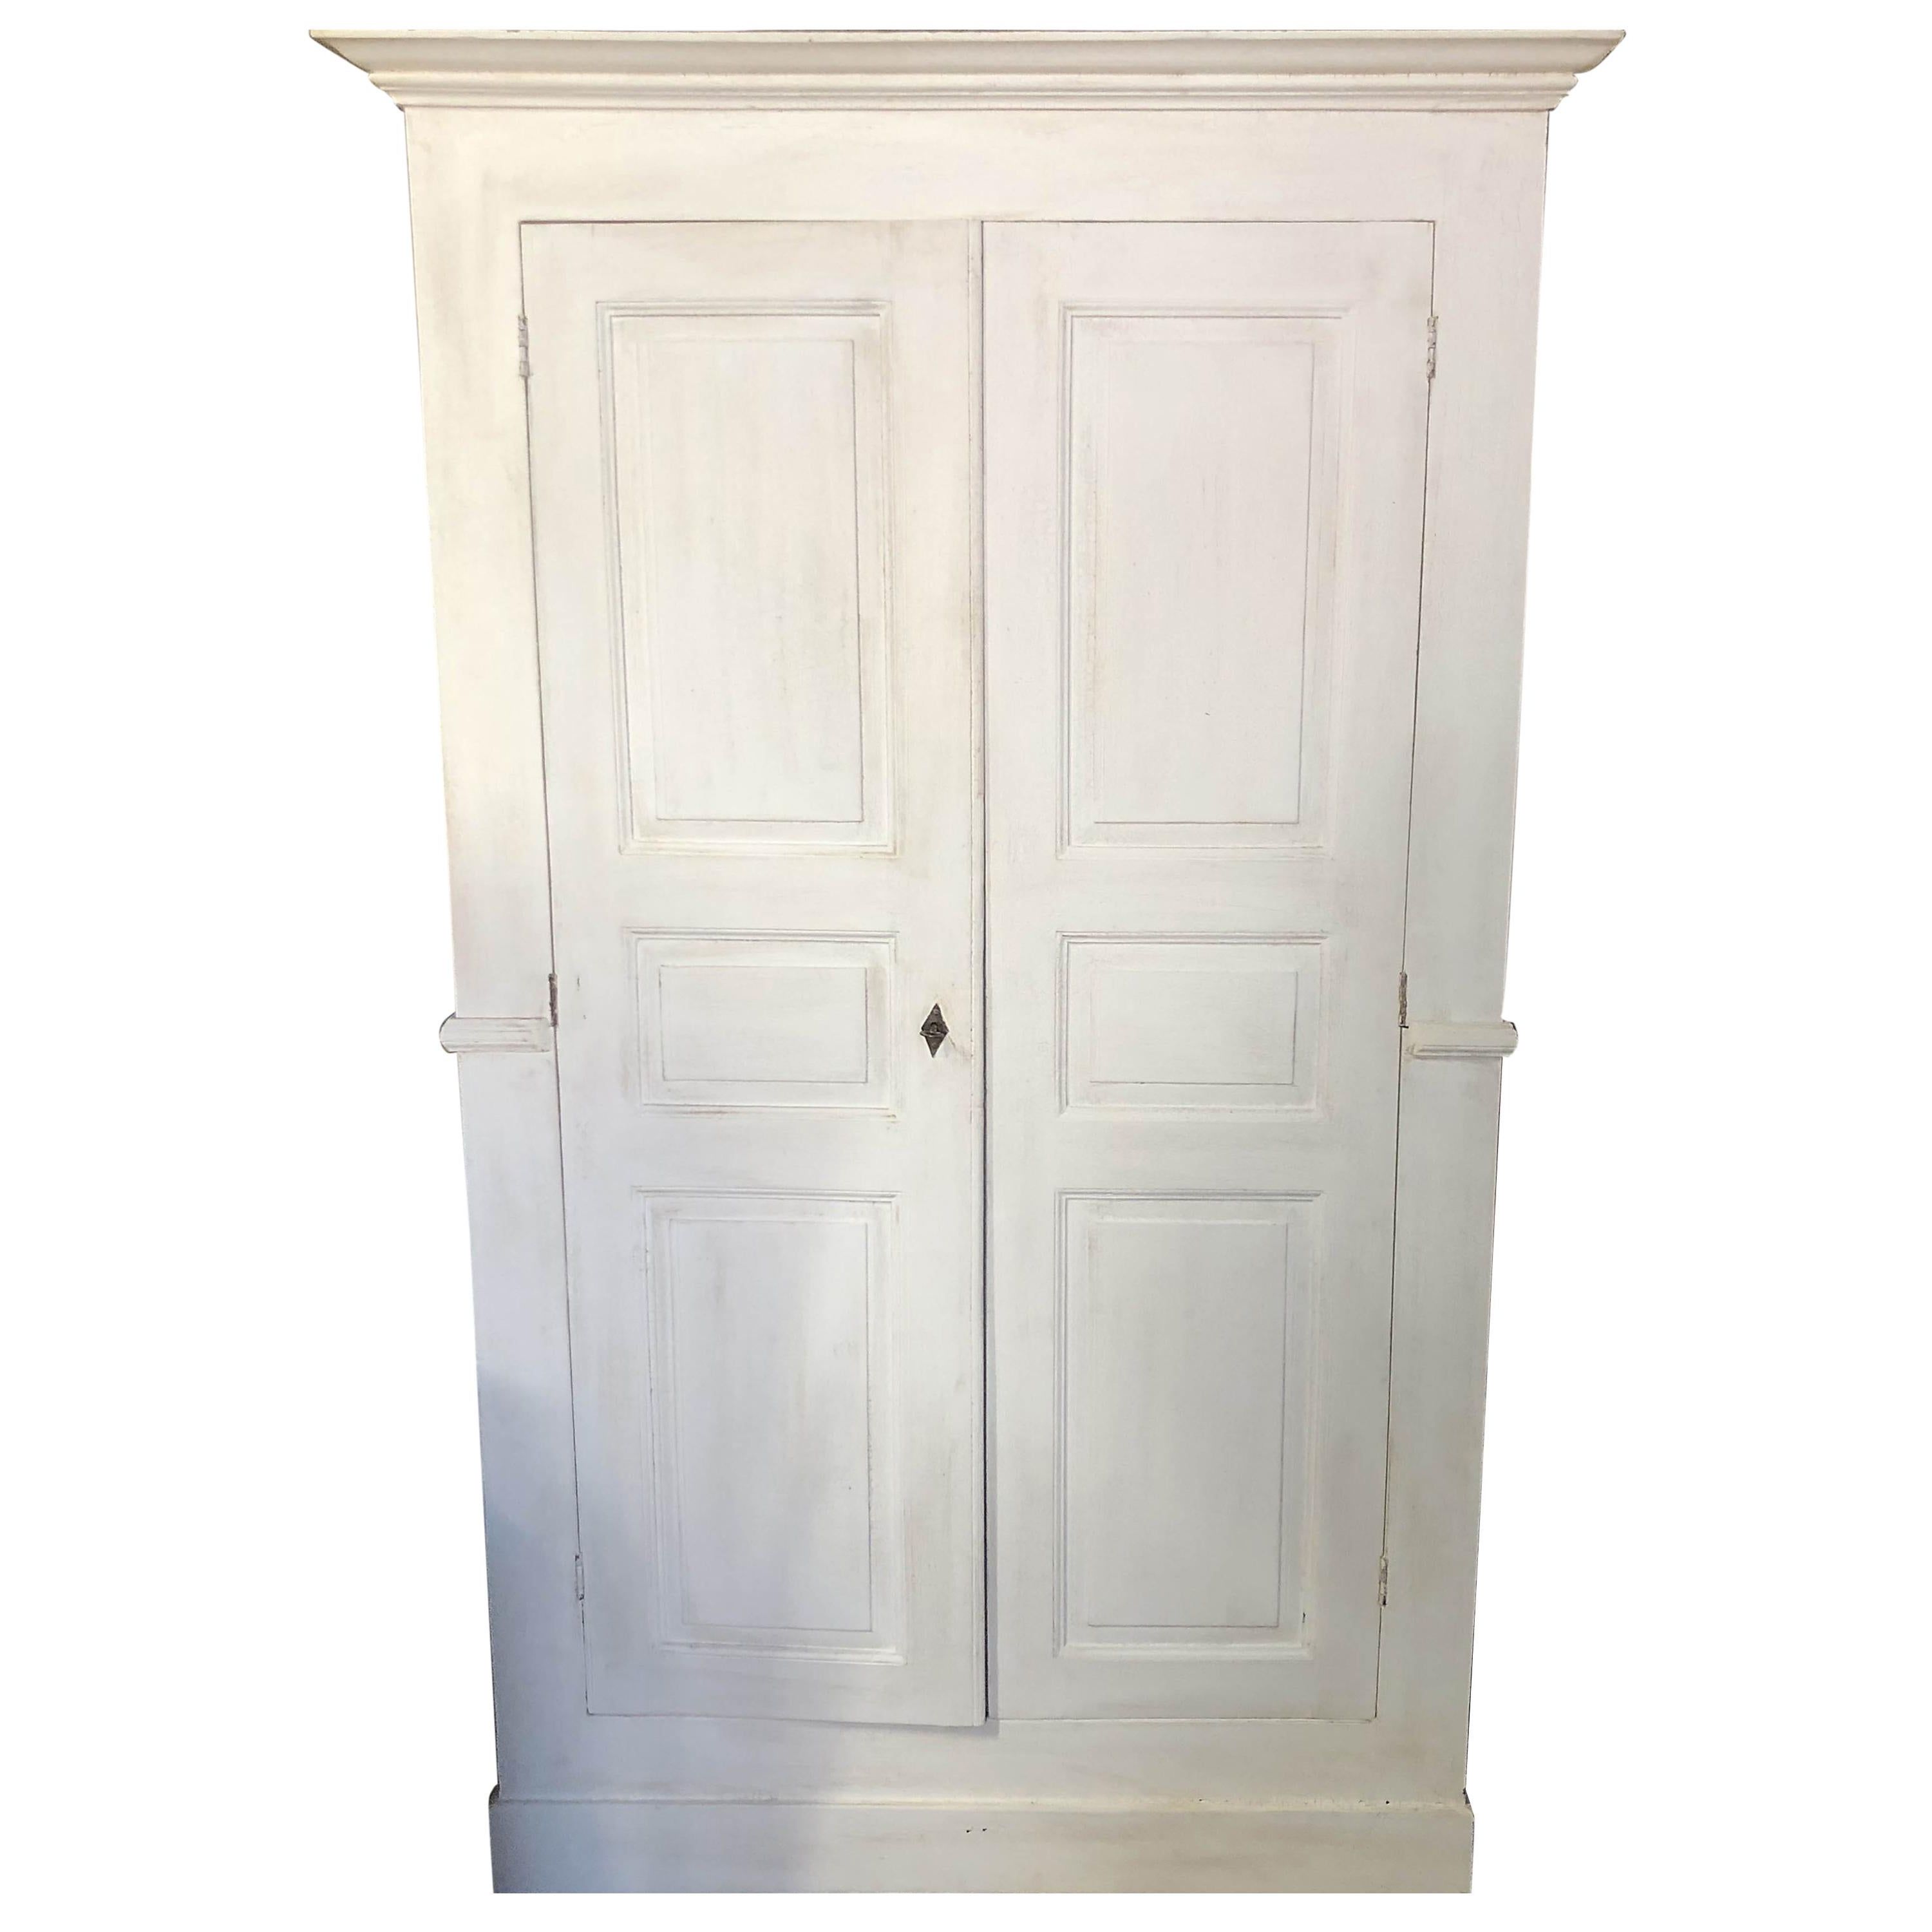 Italian Shabby White Piedmontese Wardrobe Sideboard Pantry Cabinet Shelves  For Sale At 1stdibs | Sideboard And Pantry Set, Sideboard With Pantry, White  Wardrobe Vintage Throughout White Shabby Chic Wardrobes (View 17 of 20)